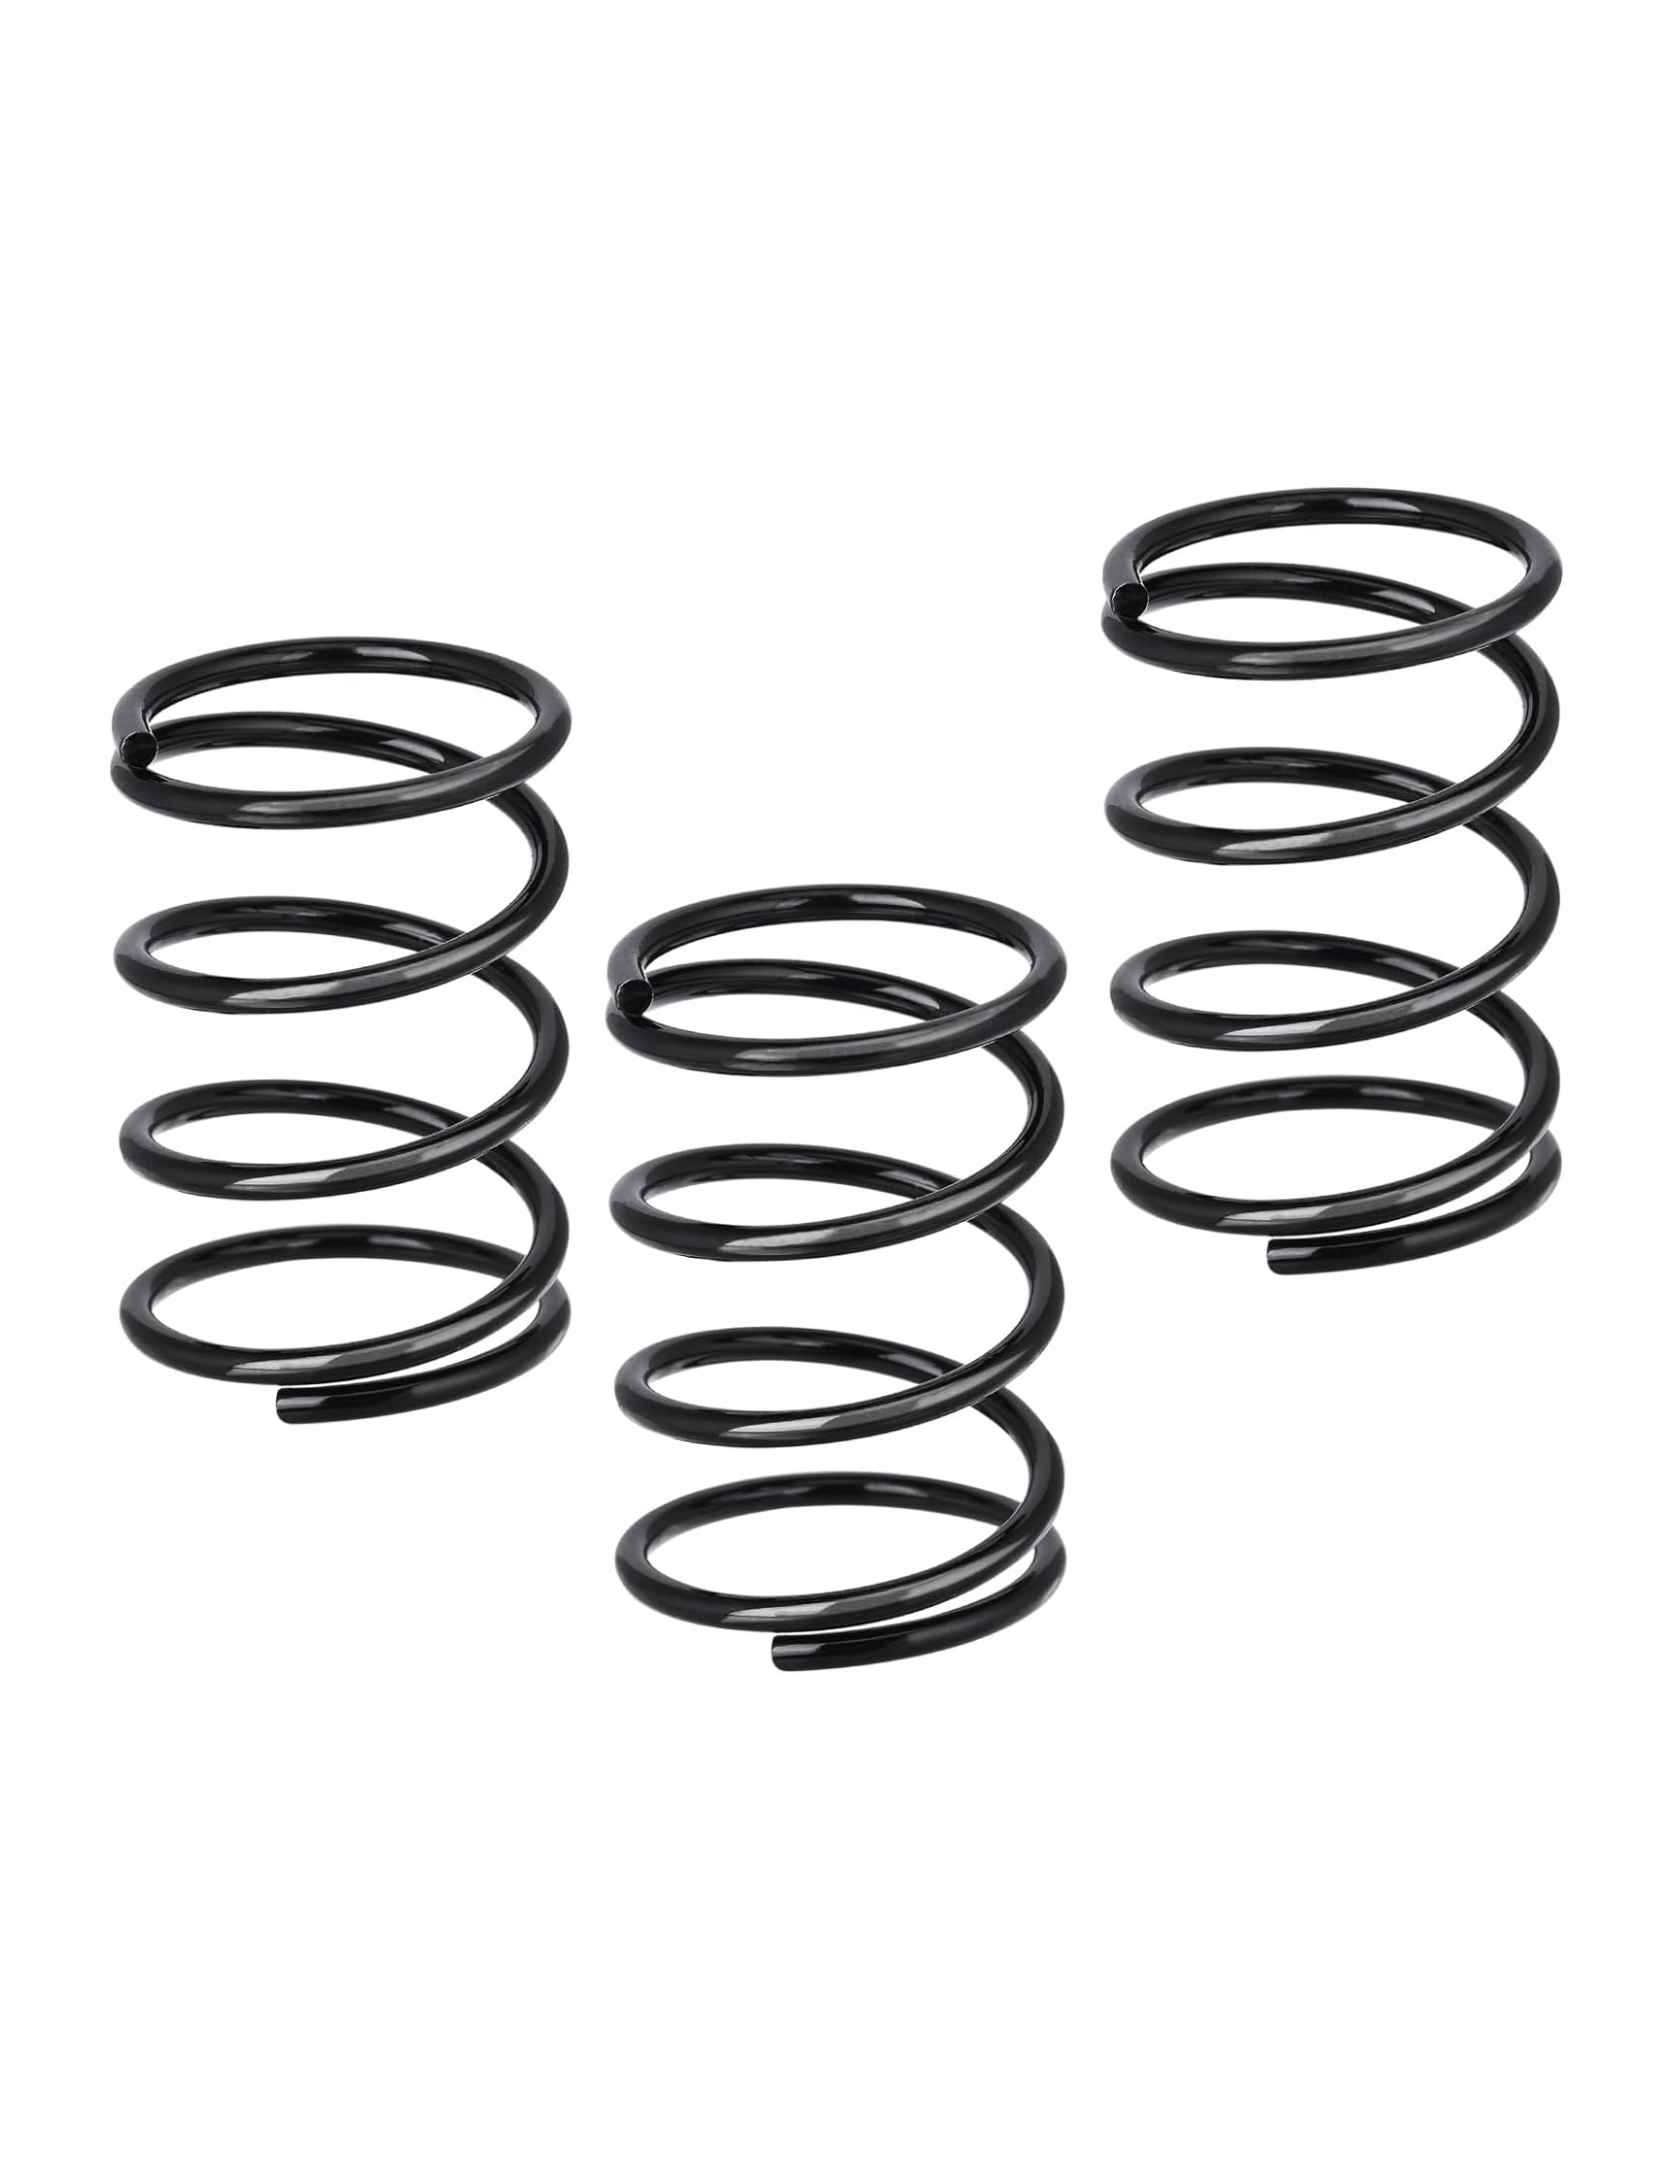 THTEN 3660582001 Replacement Spring Compatible with EGO AH1300 AH1520 AH1530 AH1531 Trimmer Head ST1500 ST15000-S ST1500F ST1500SF ST1510S ST1510T ST1520 ST1530 and STA1500 15" String Trimmers